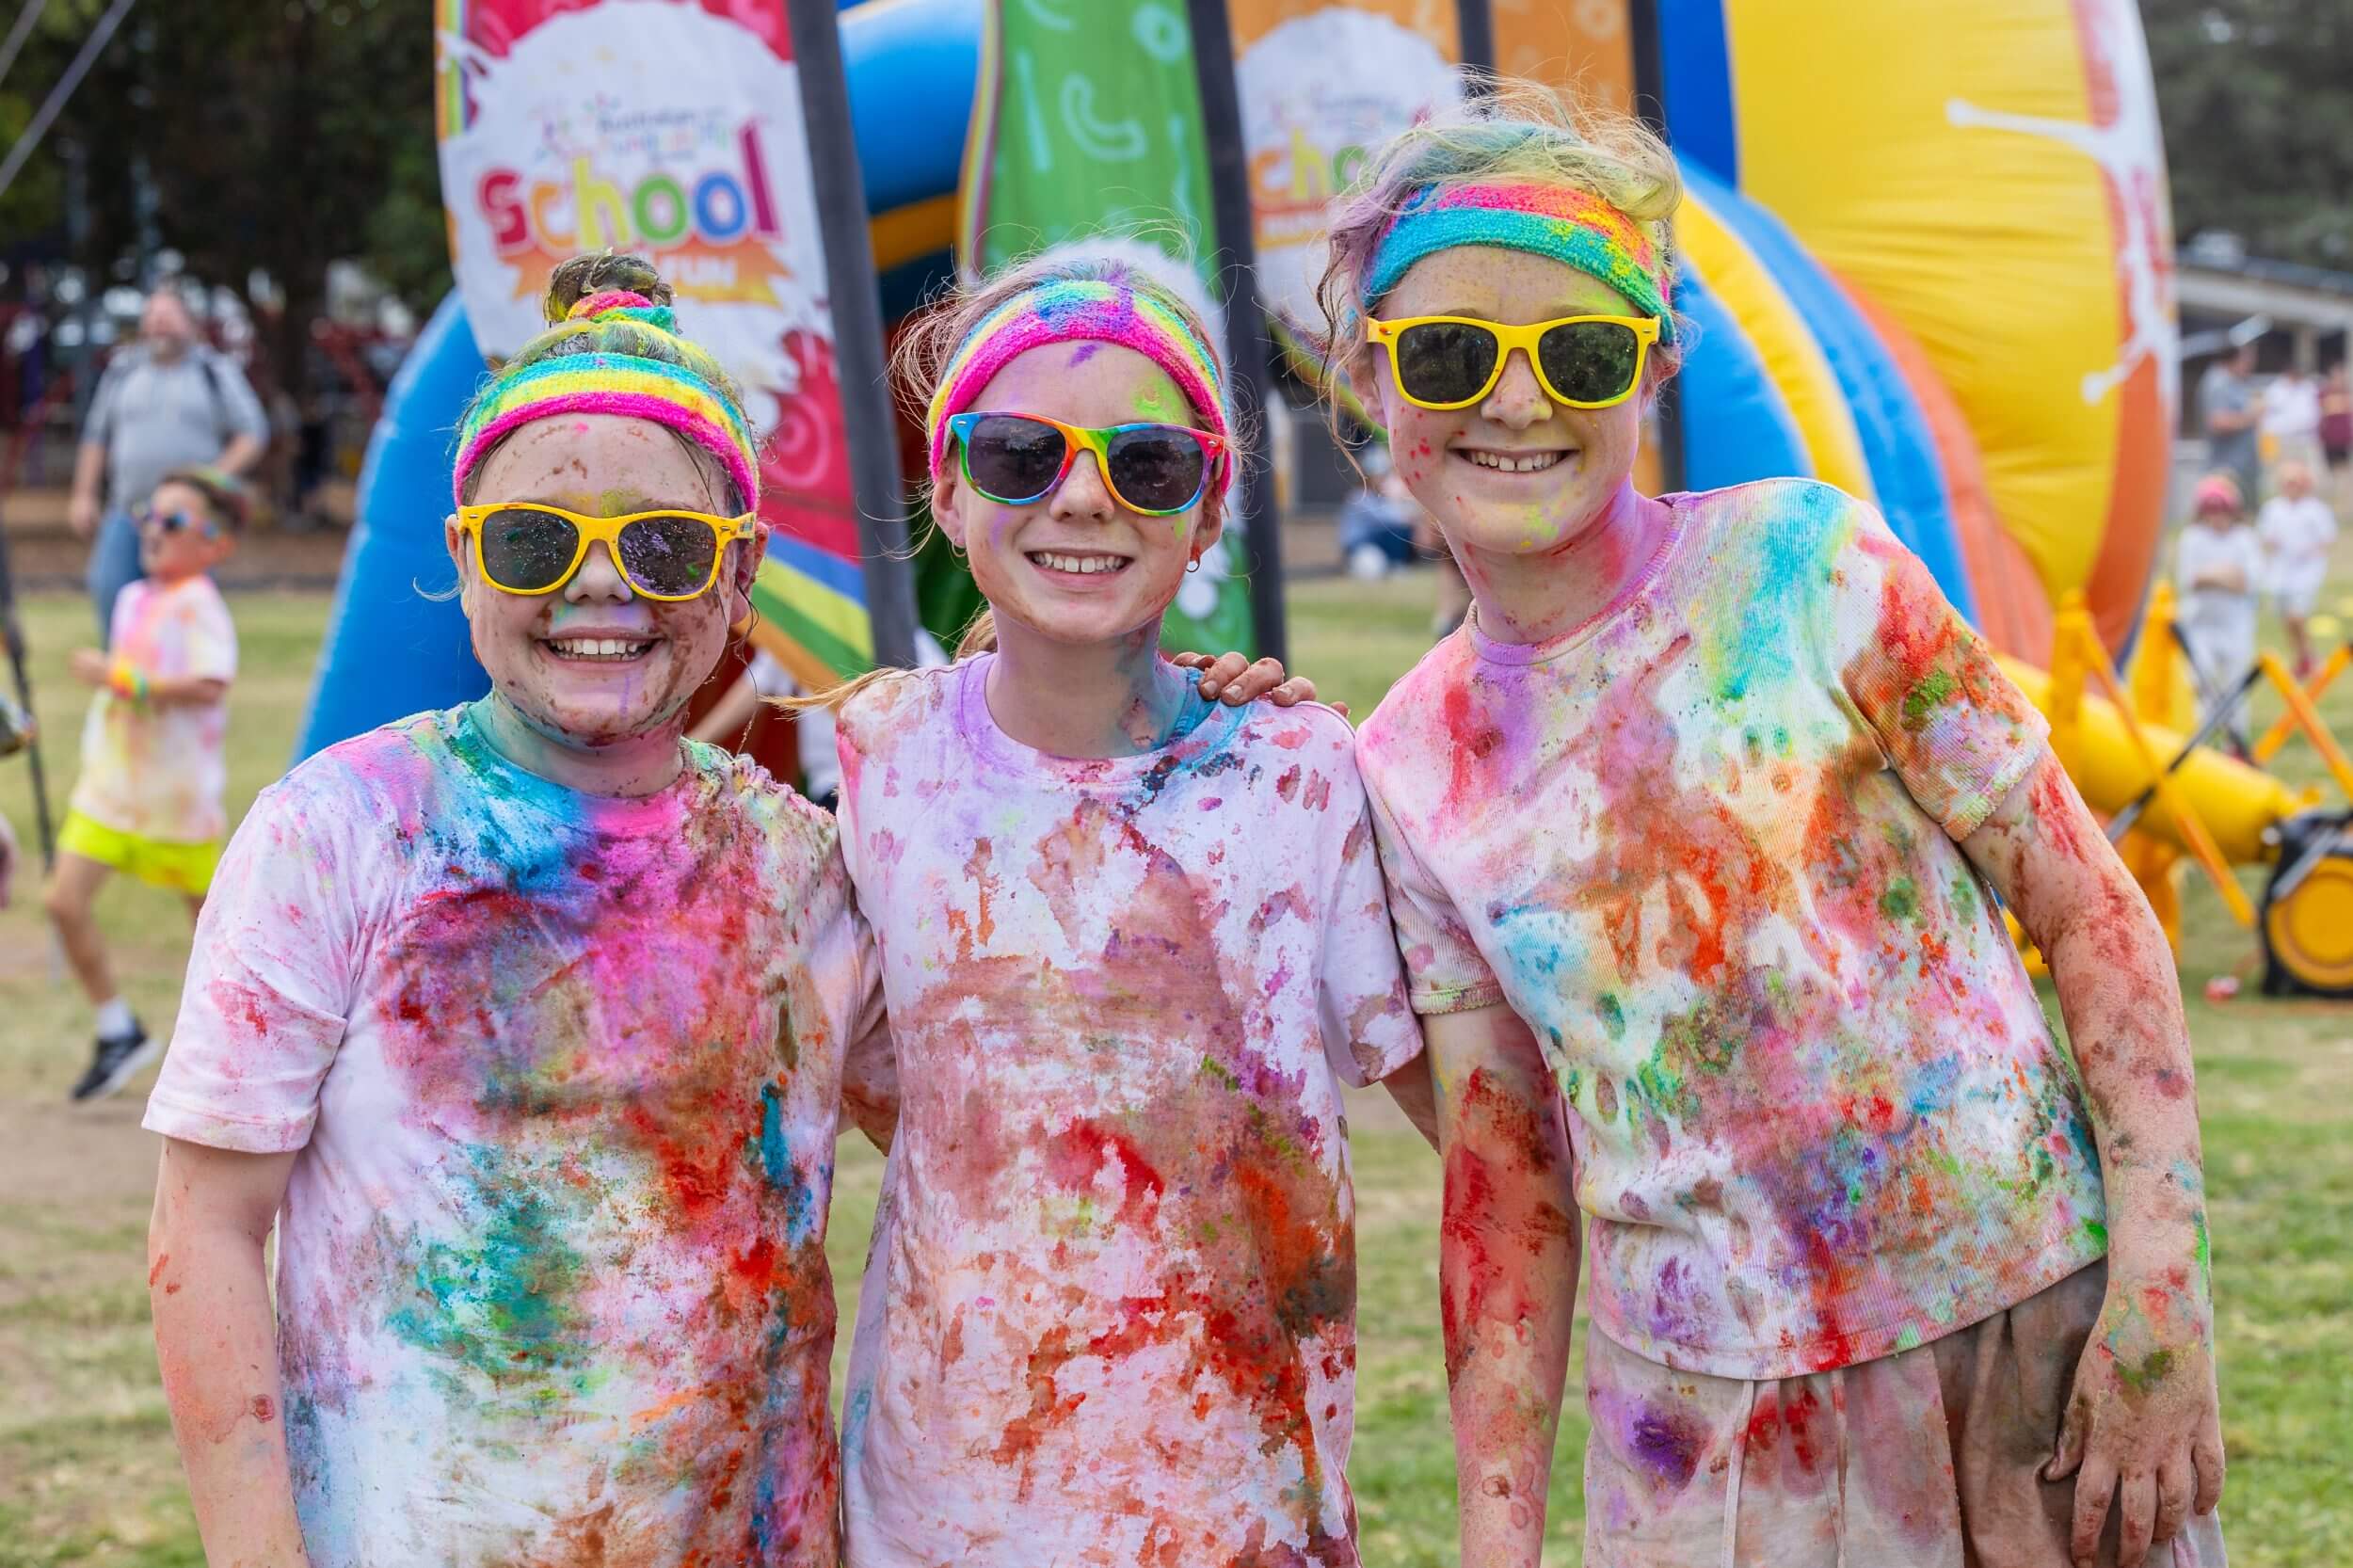 three children smile at the camera, covered in colour after enjoying a school fun run.